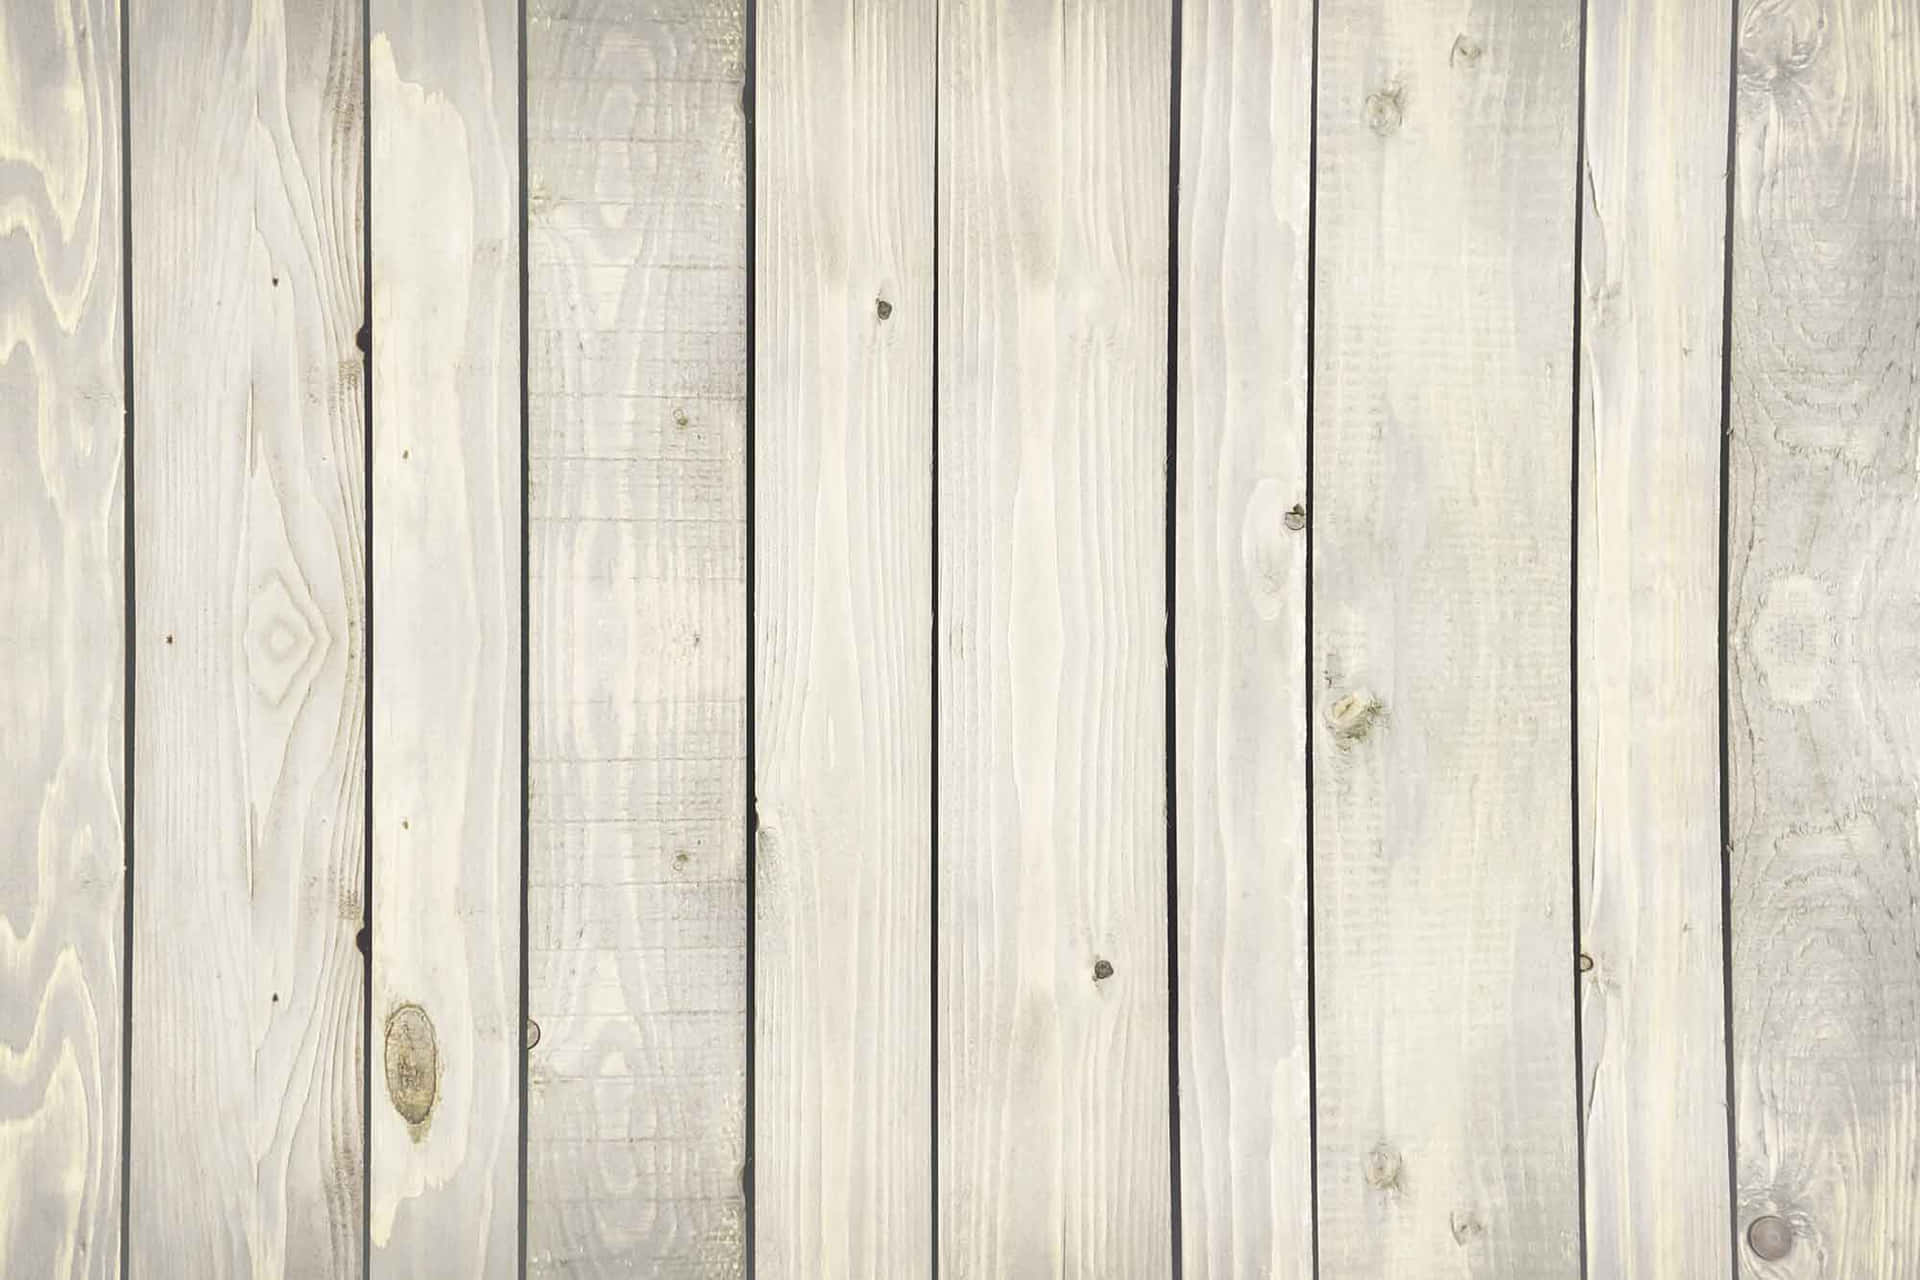 White Wood Planks With White Paint On Them